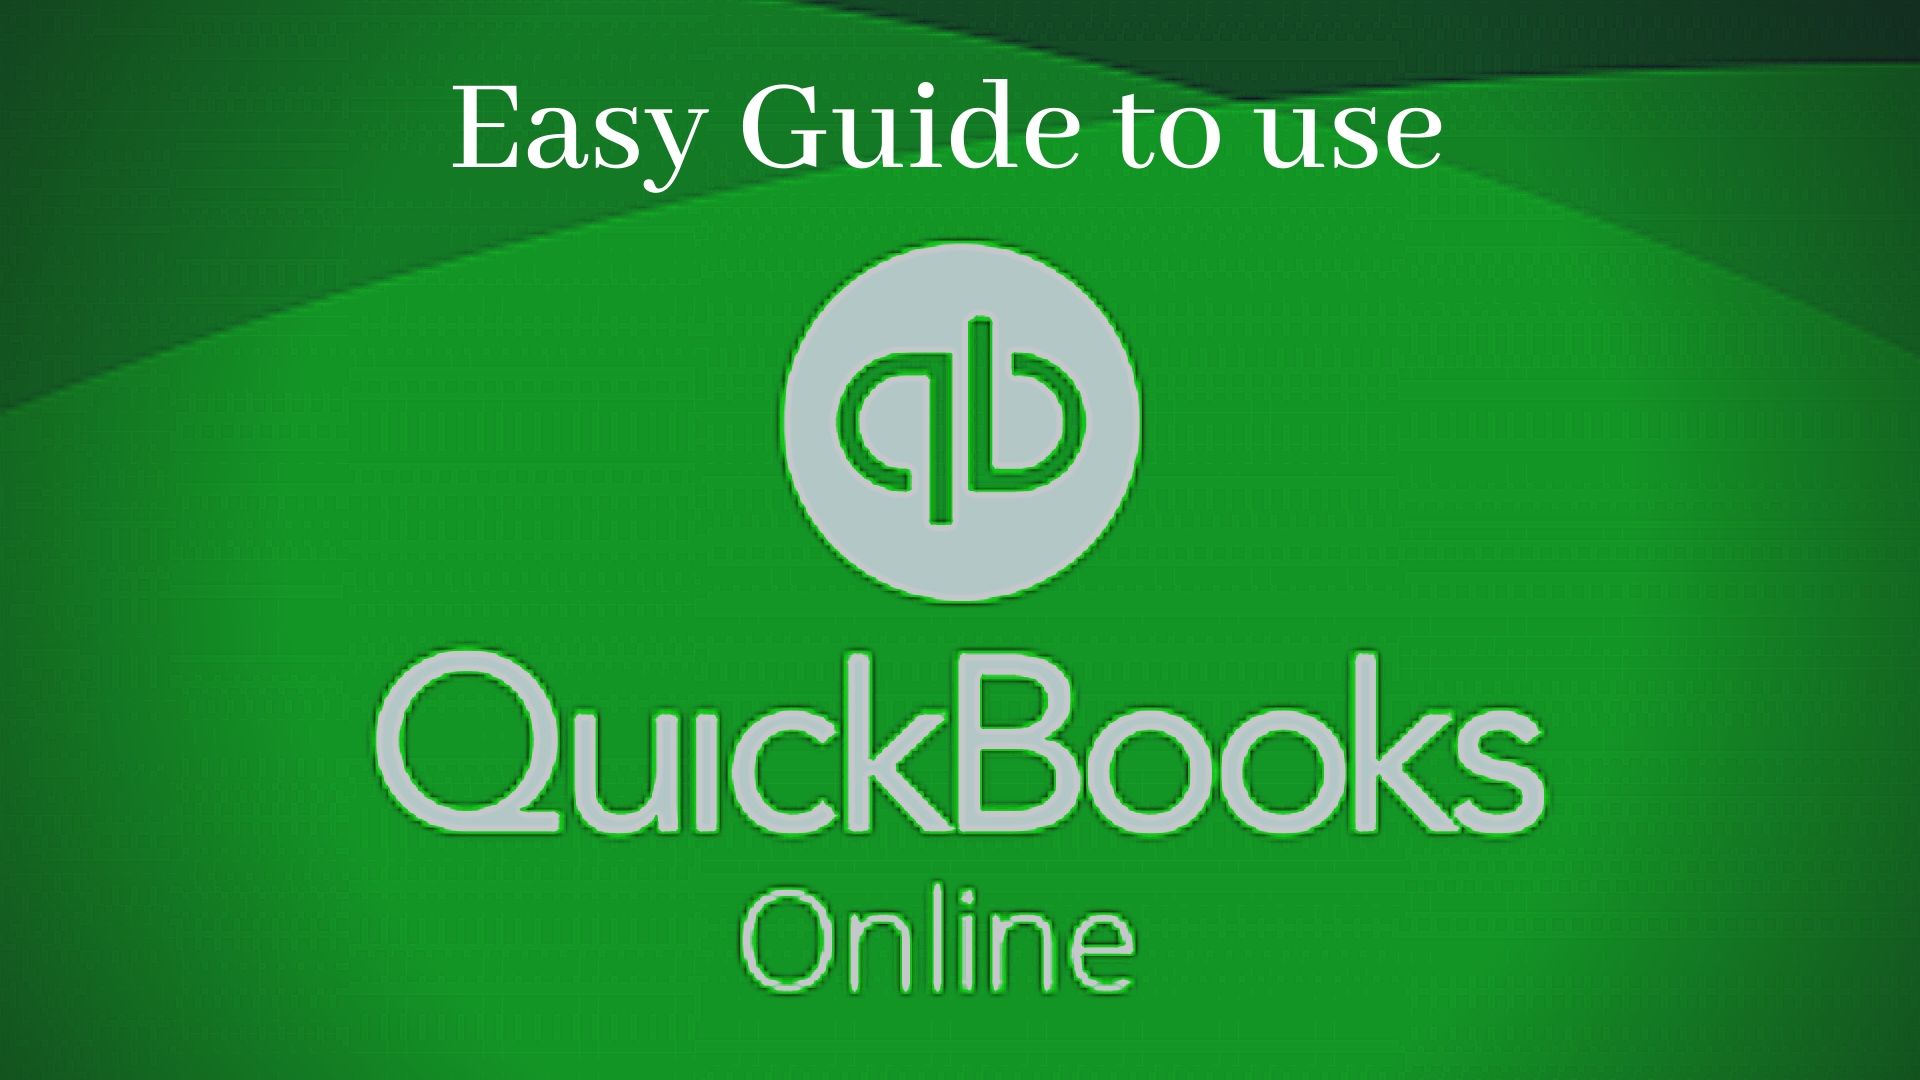 Easy Guide to use QuickBooks Online